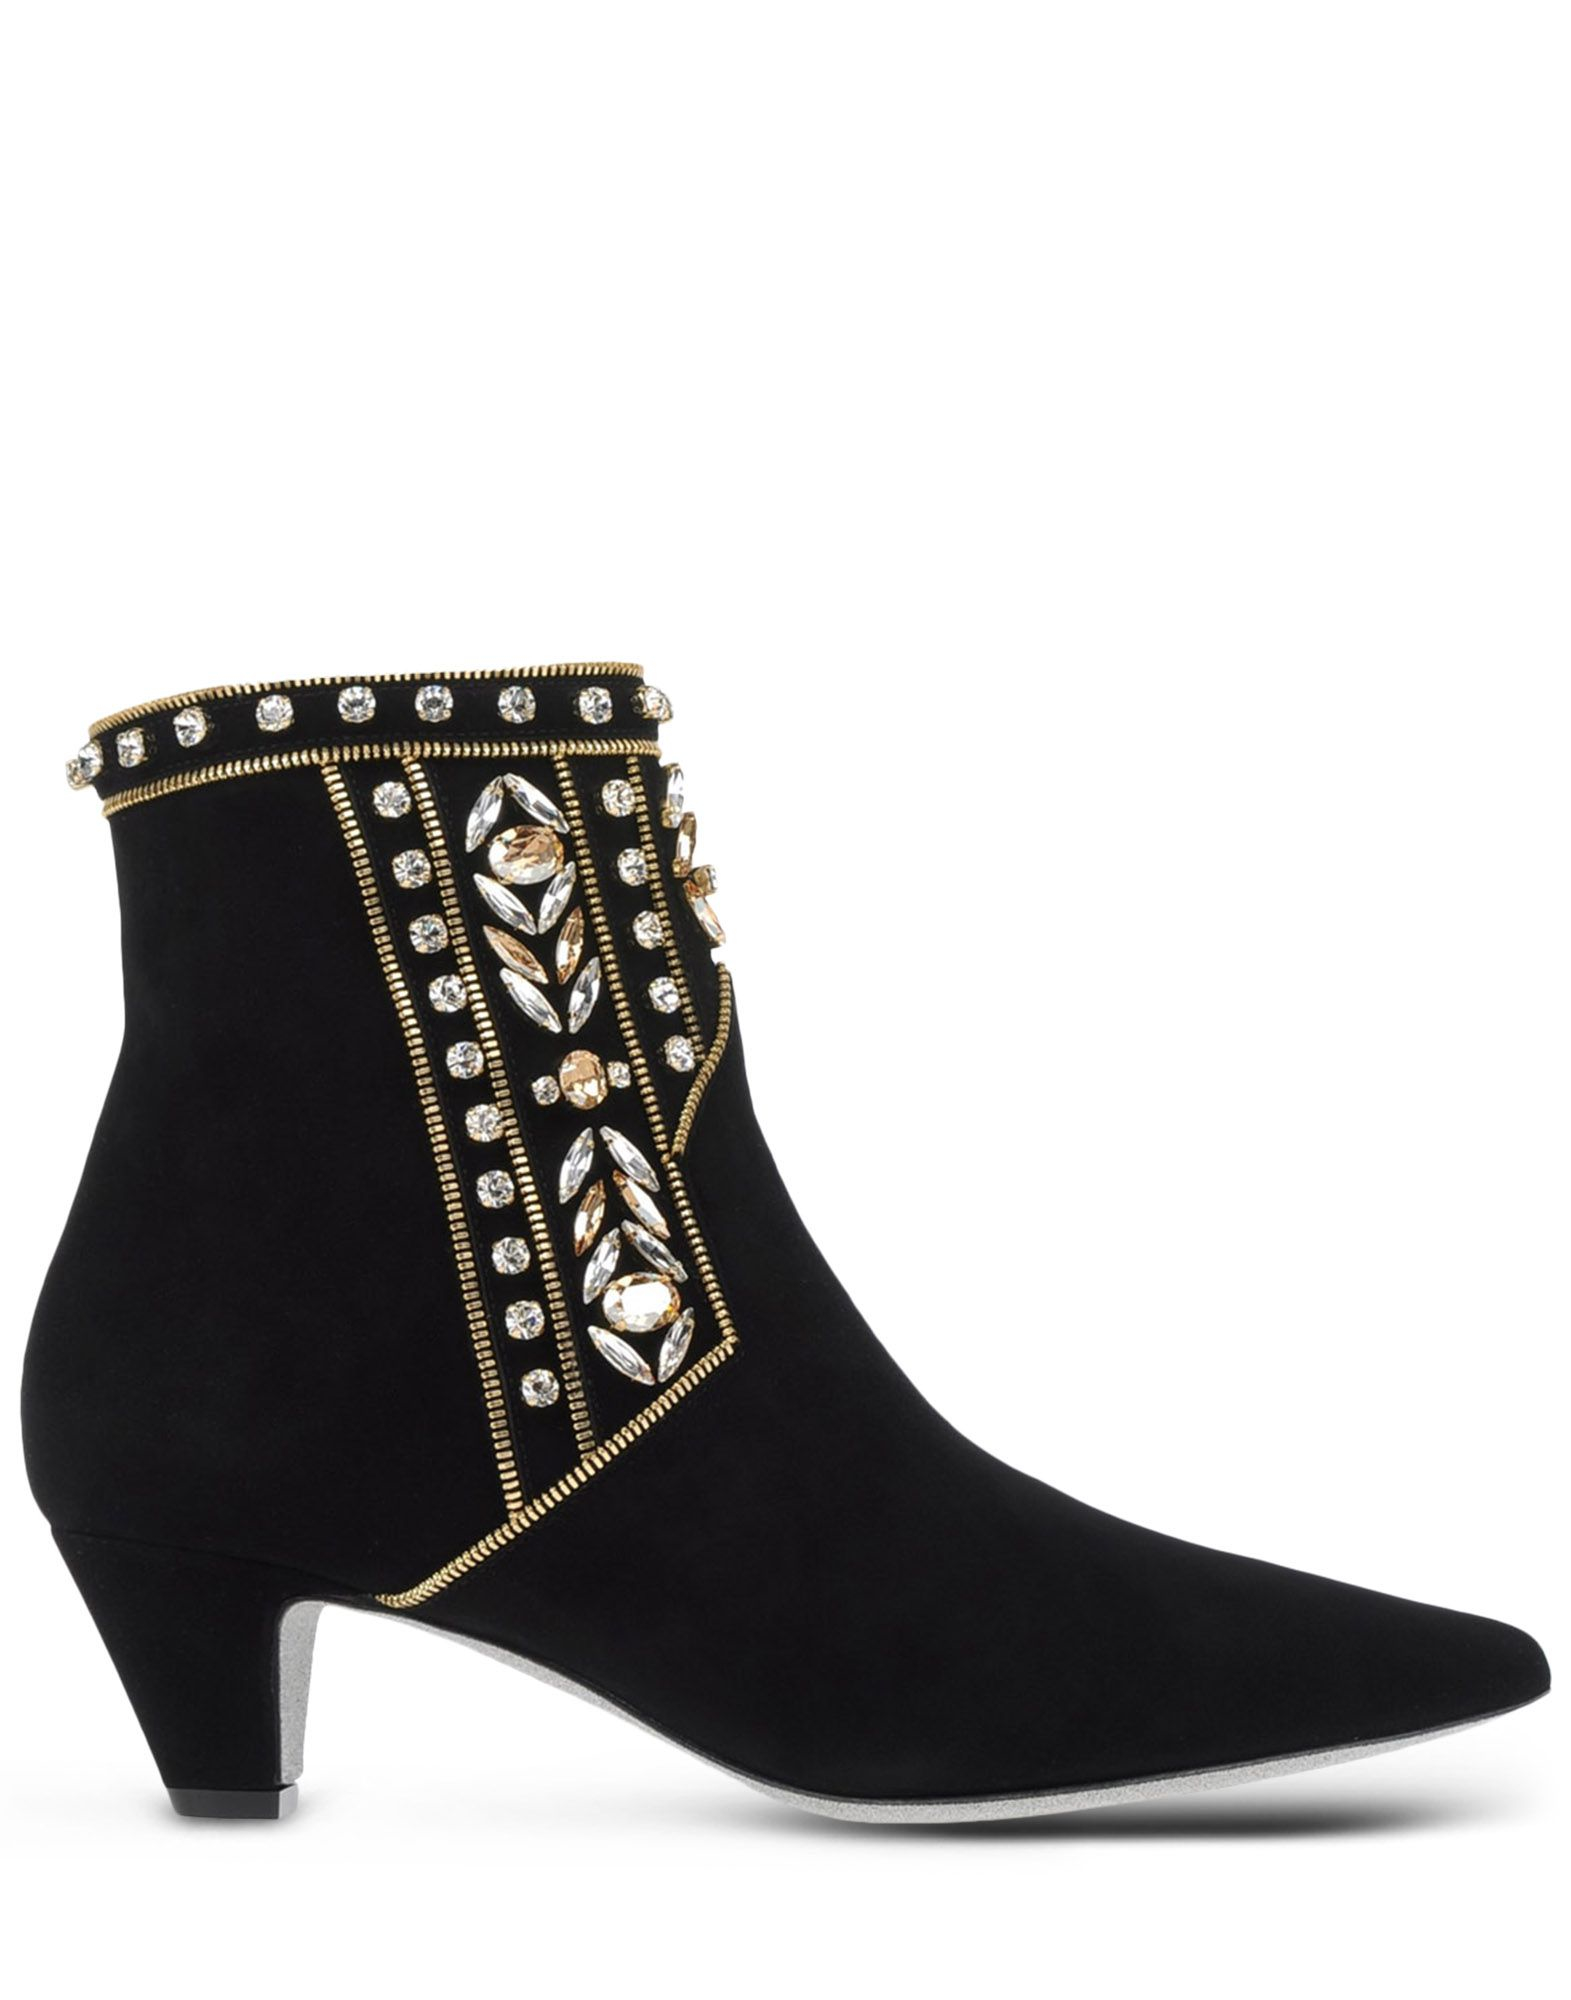 Rene caovilla Ankle Boots in Black | Lyst